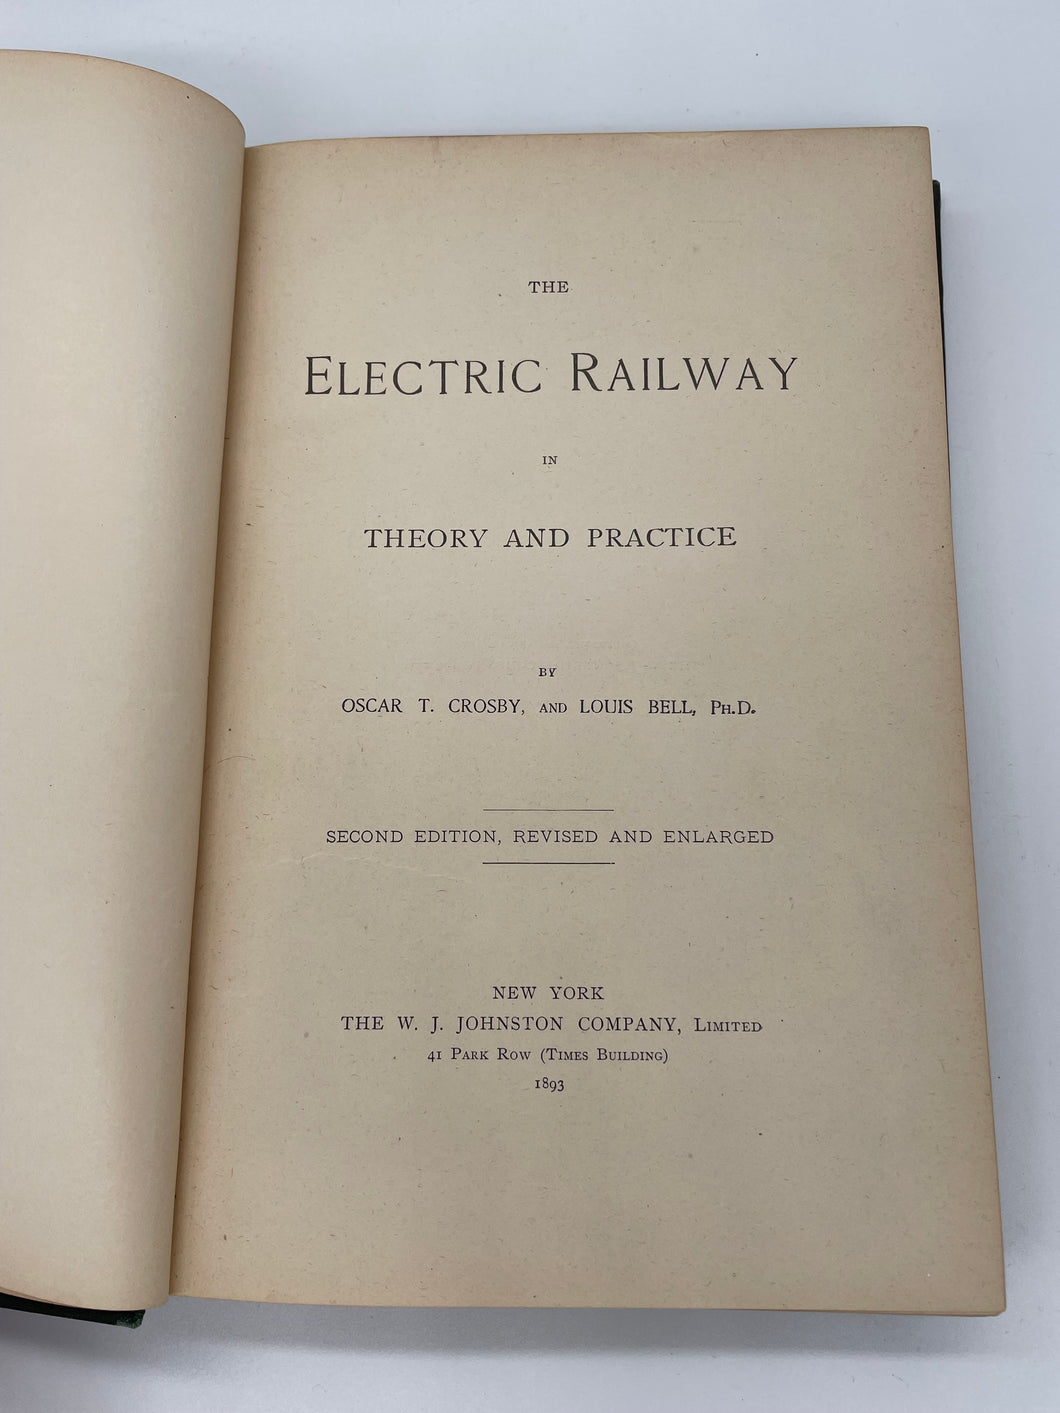 The Electric Railway in Theory And Practice